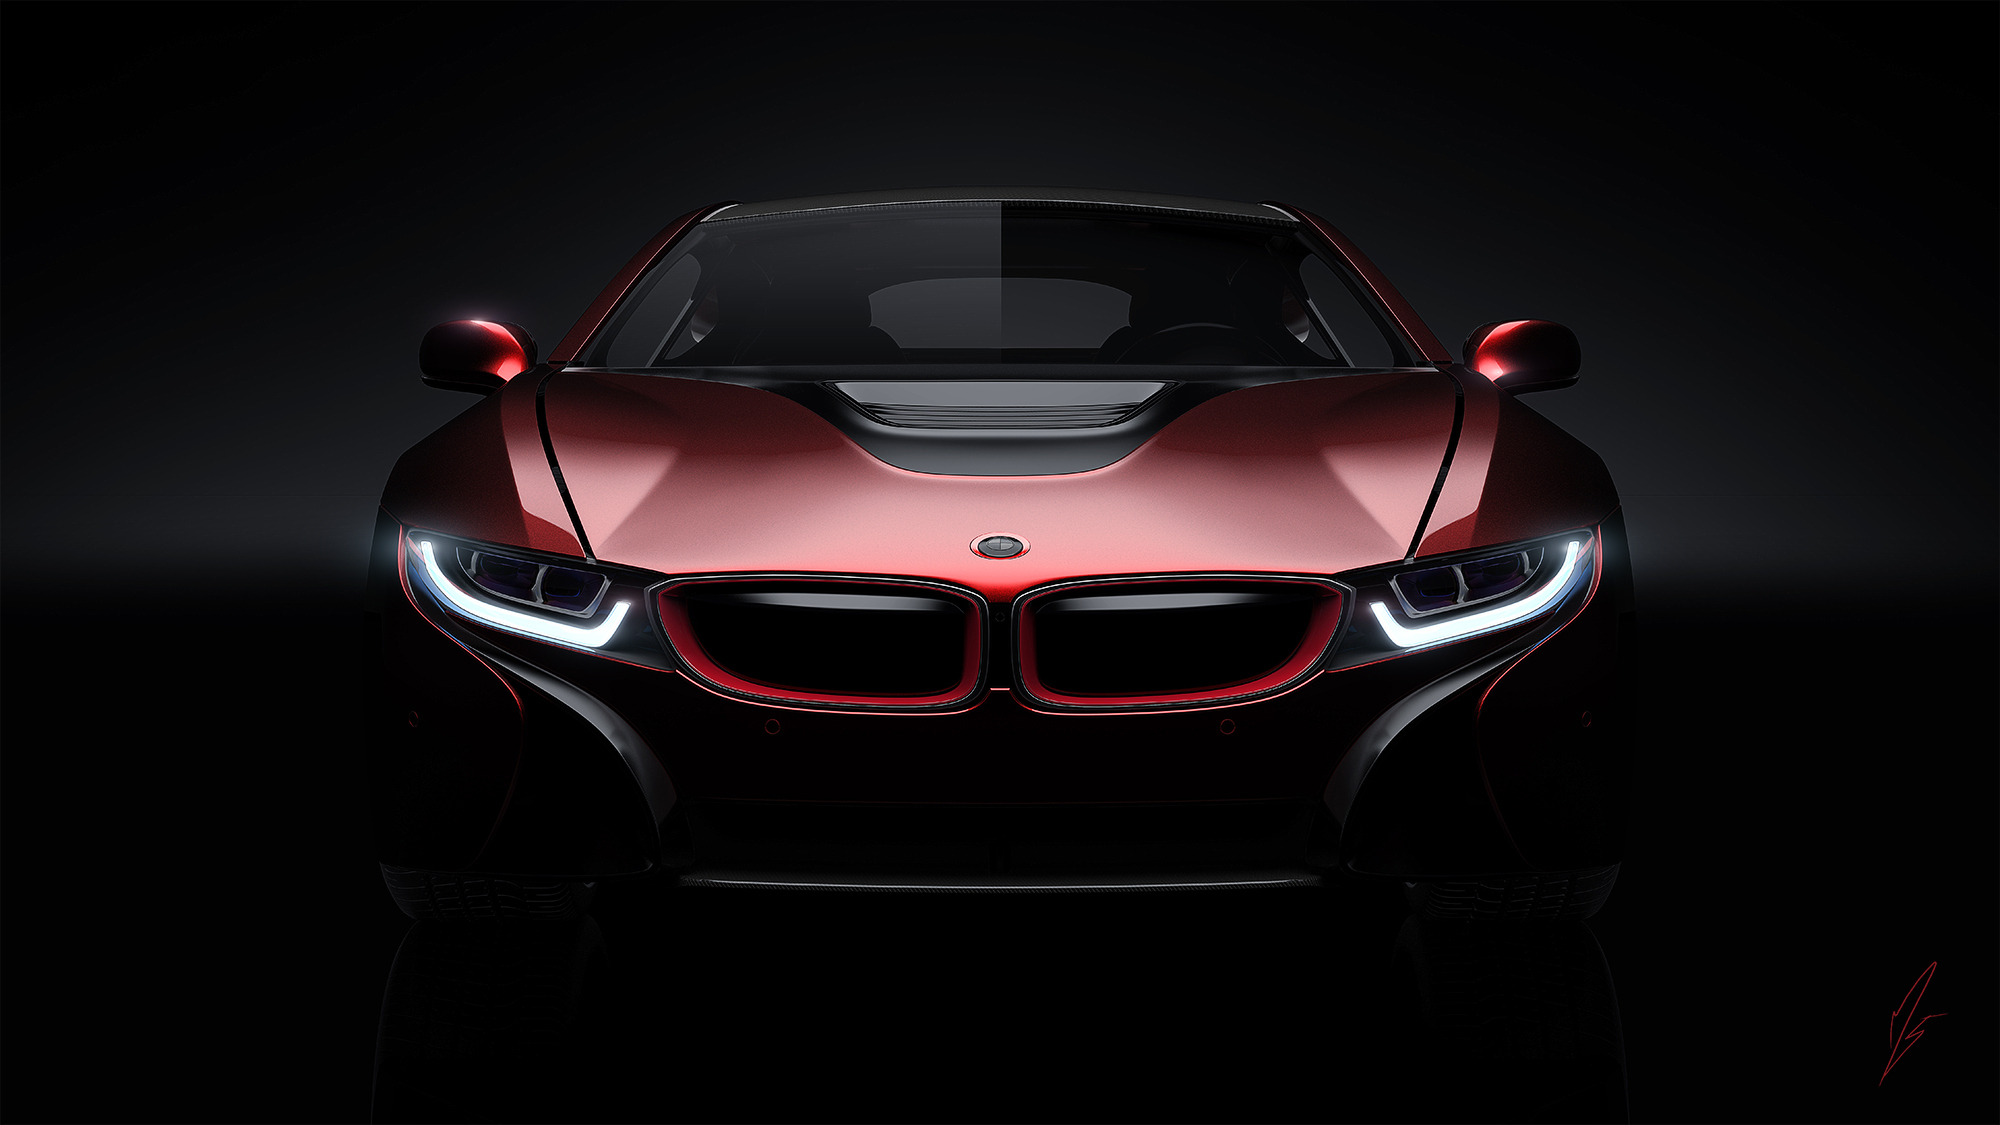 134740 download wallpaper cars, bmw, front view, concept, i8 screensavers and pictures for free